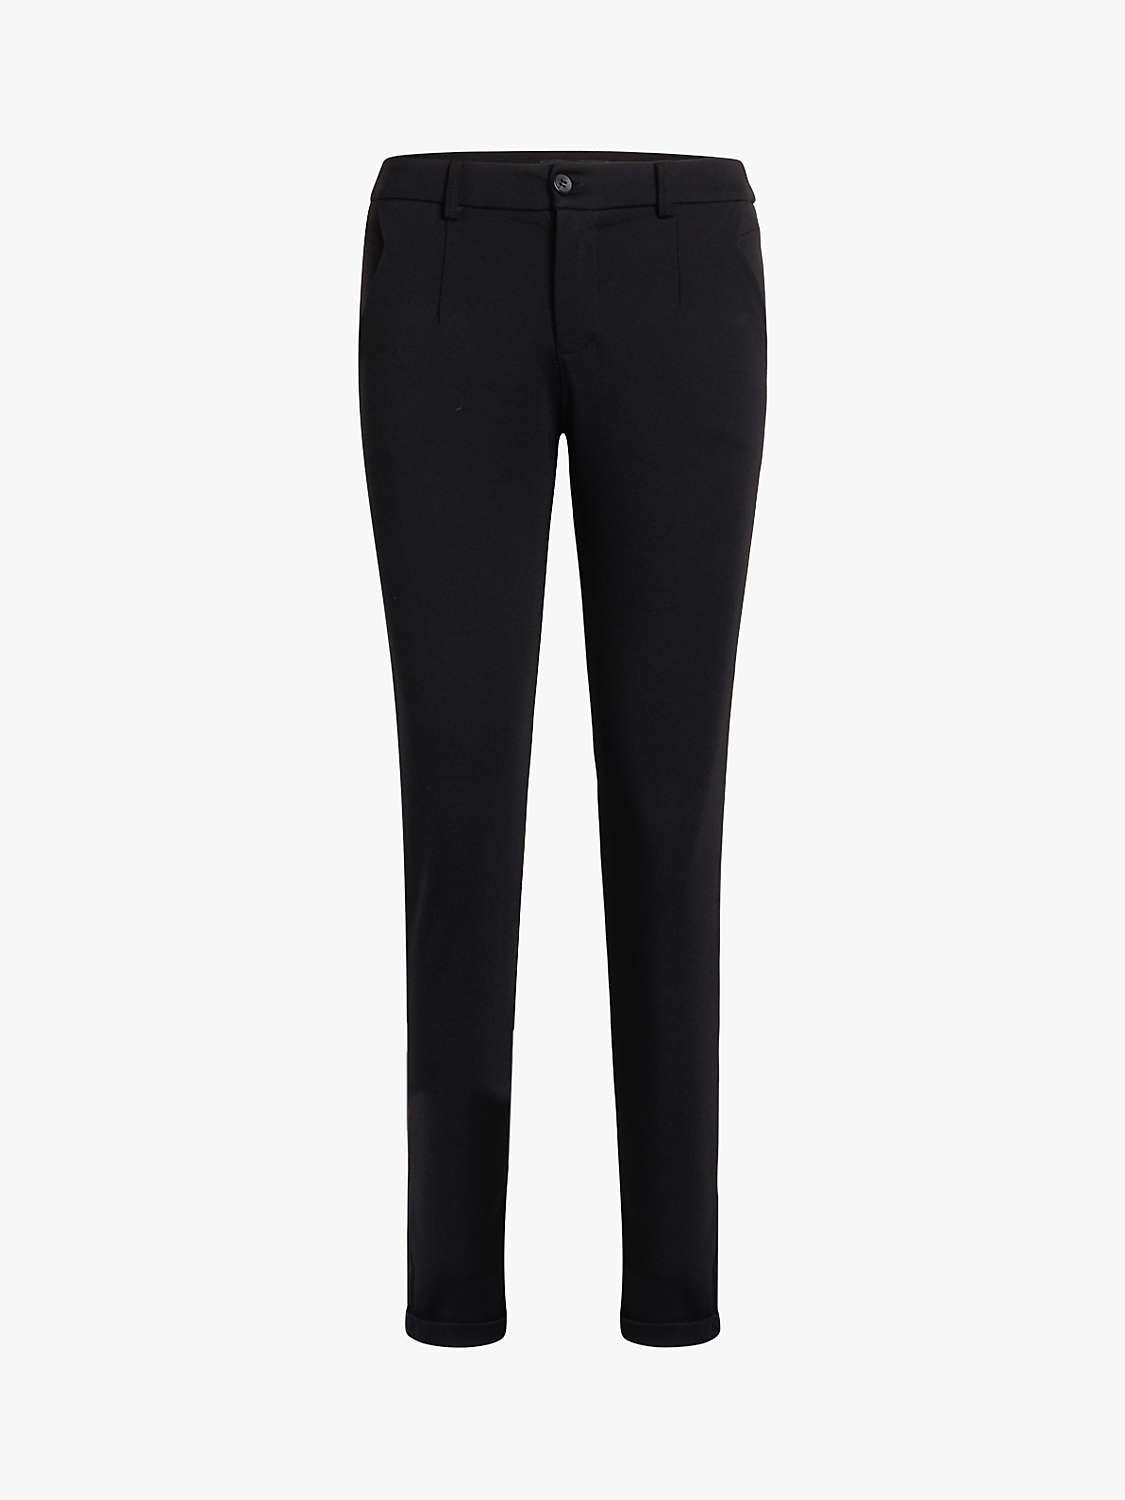 Buy Sisters Point New George Classic Slim Fit Trousers, Black Online at johnlewis.com